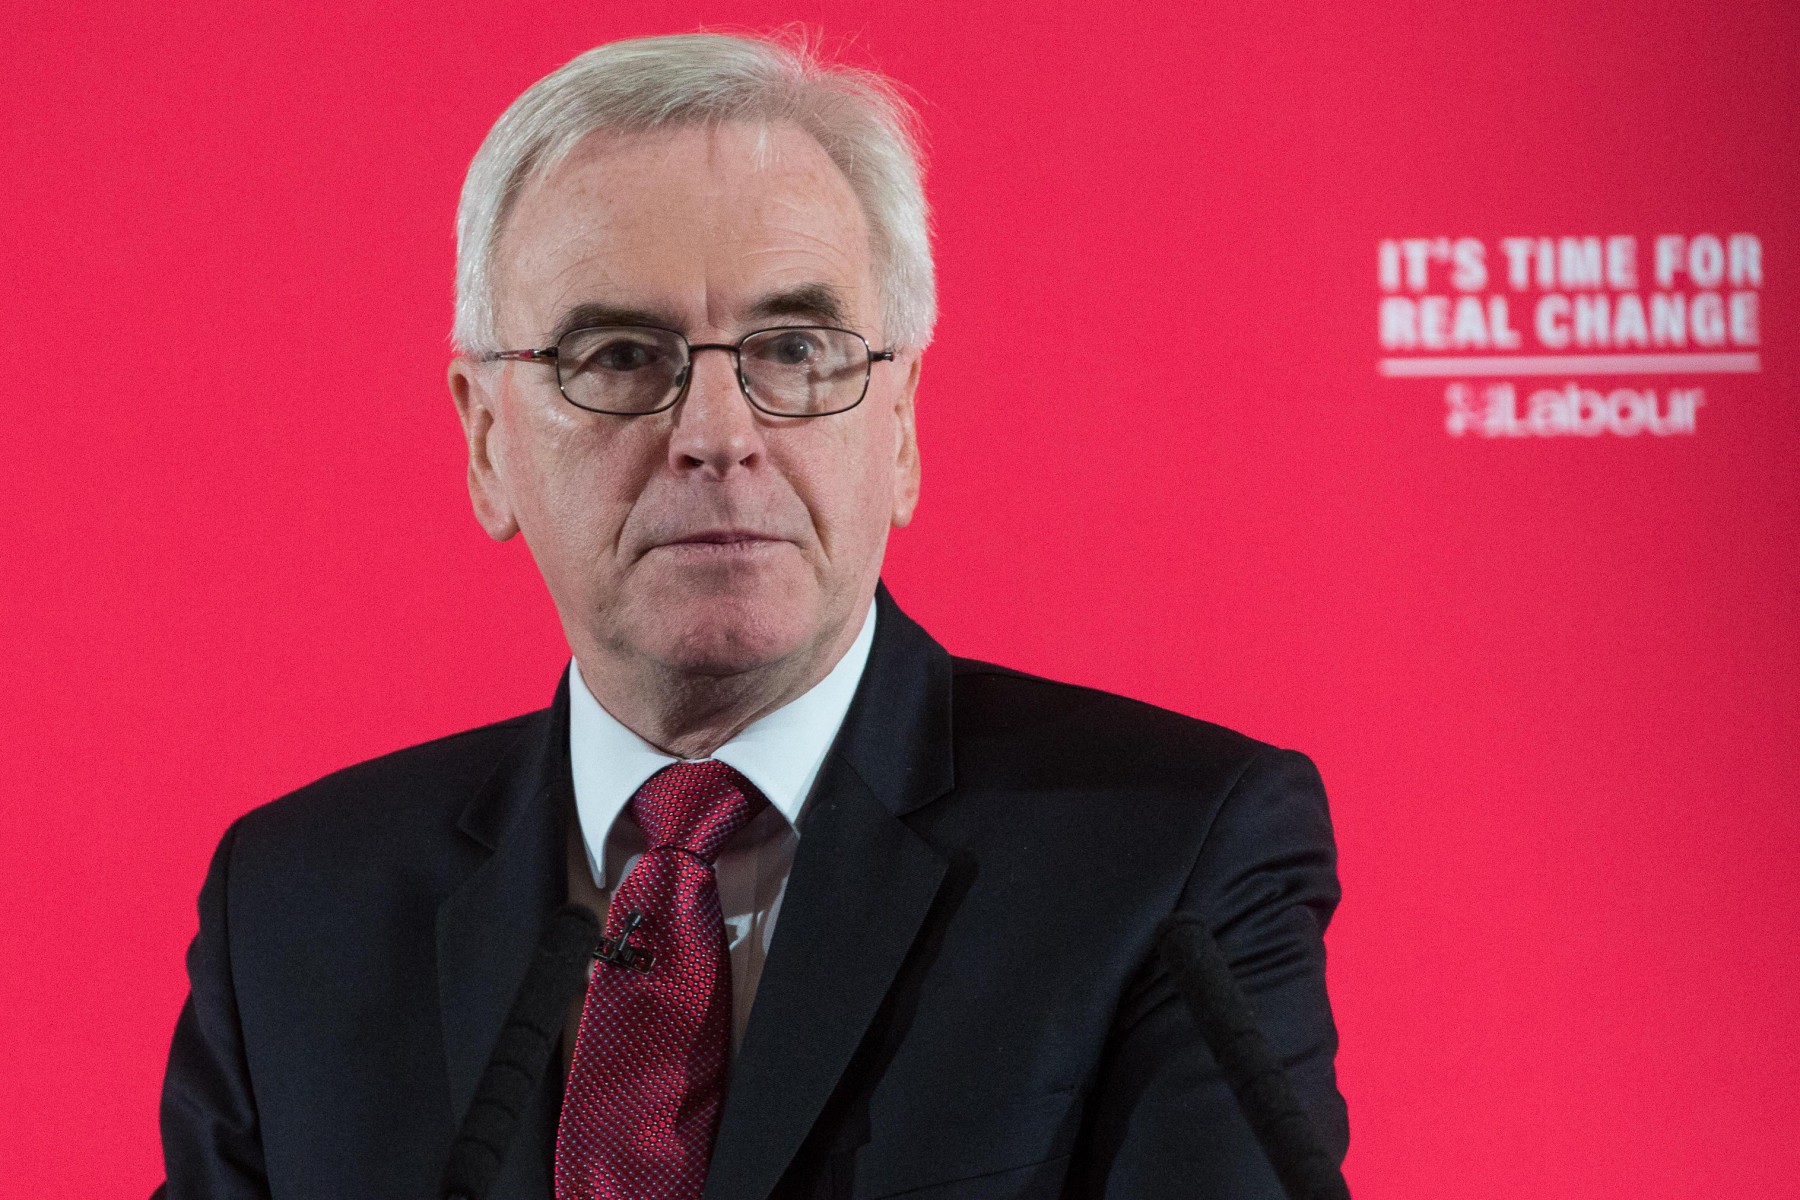 John McDonnell branded the Tory dossier 'a pathetic and vacuous package of smears, errors and double-counting'